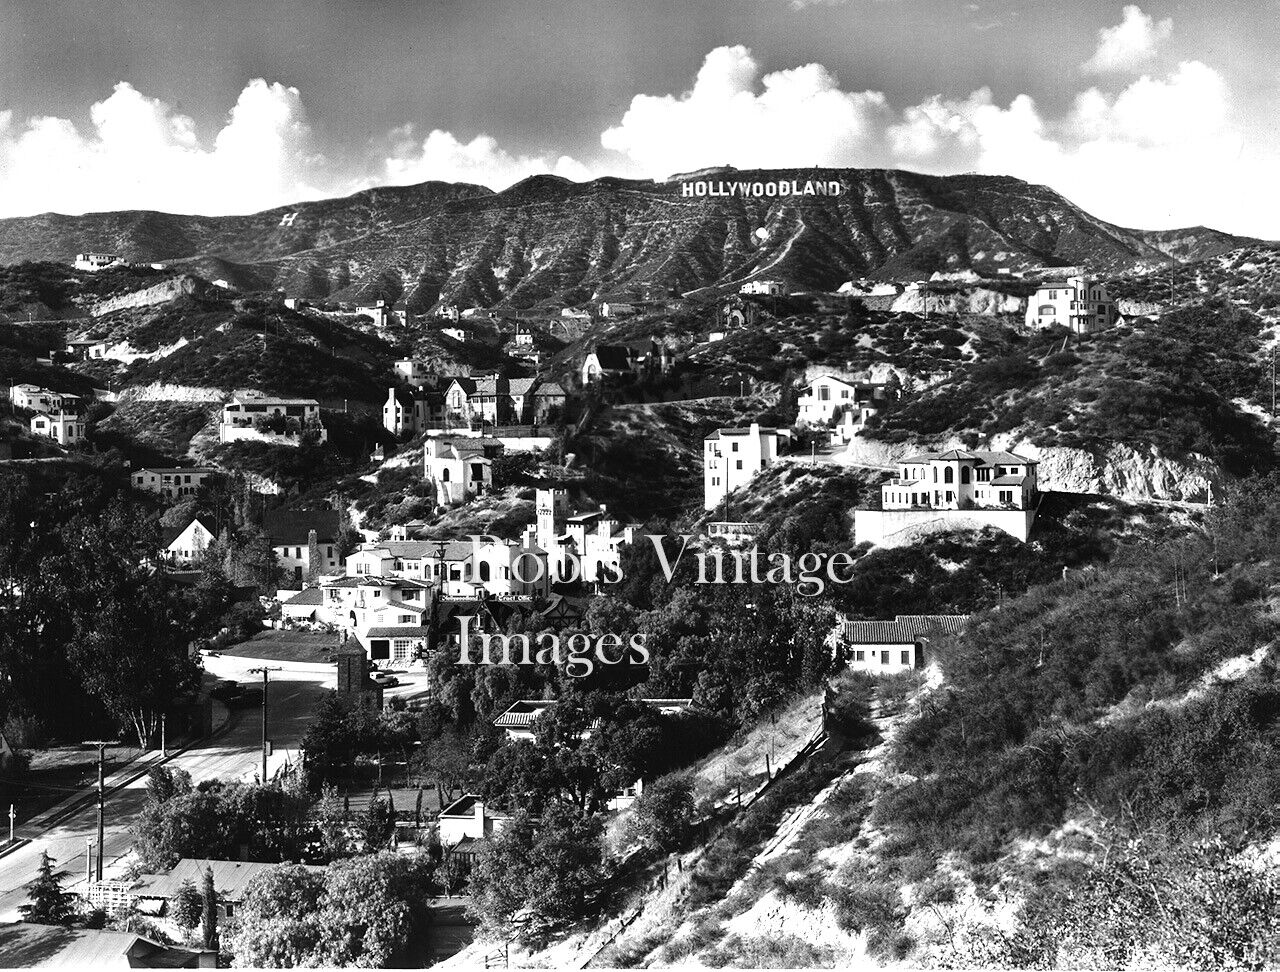 1920s Hollywood Hollywoodland sign photo Los Angeles suburb Movie Star Alley 